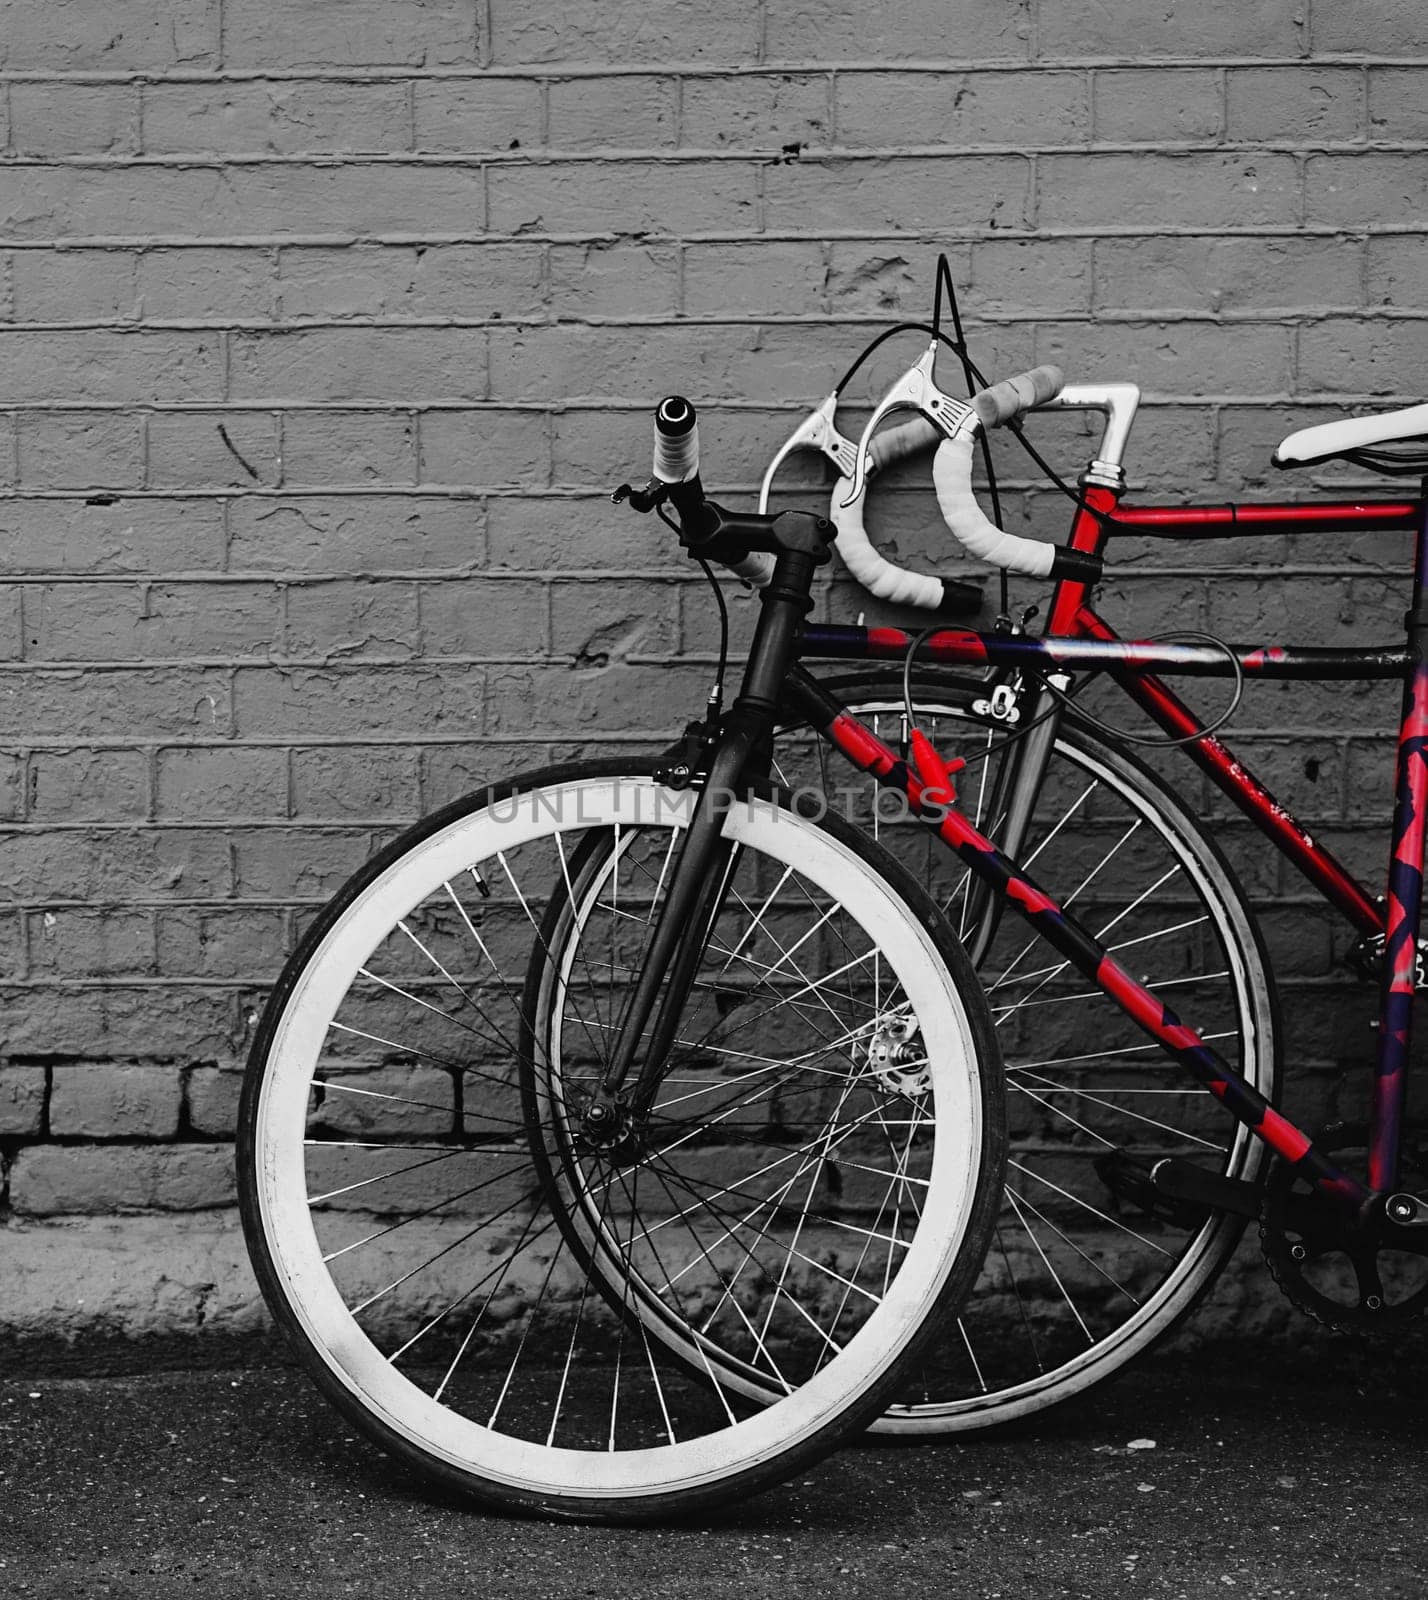 two vintage bicycles parking against red brick wall